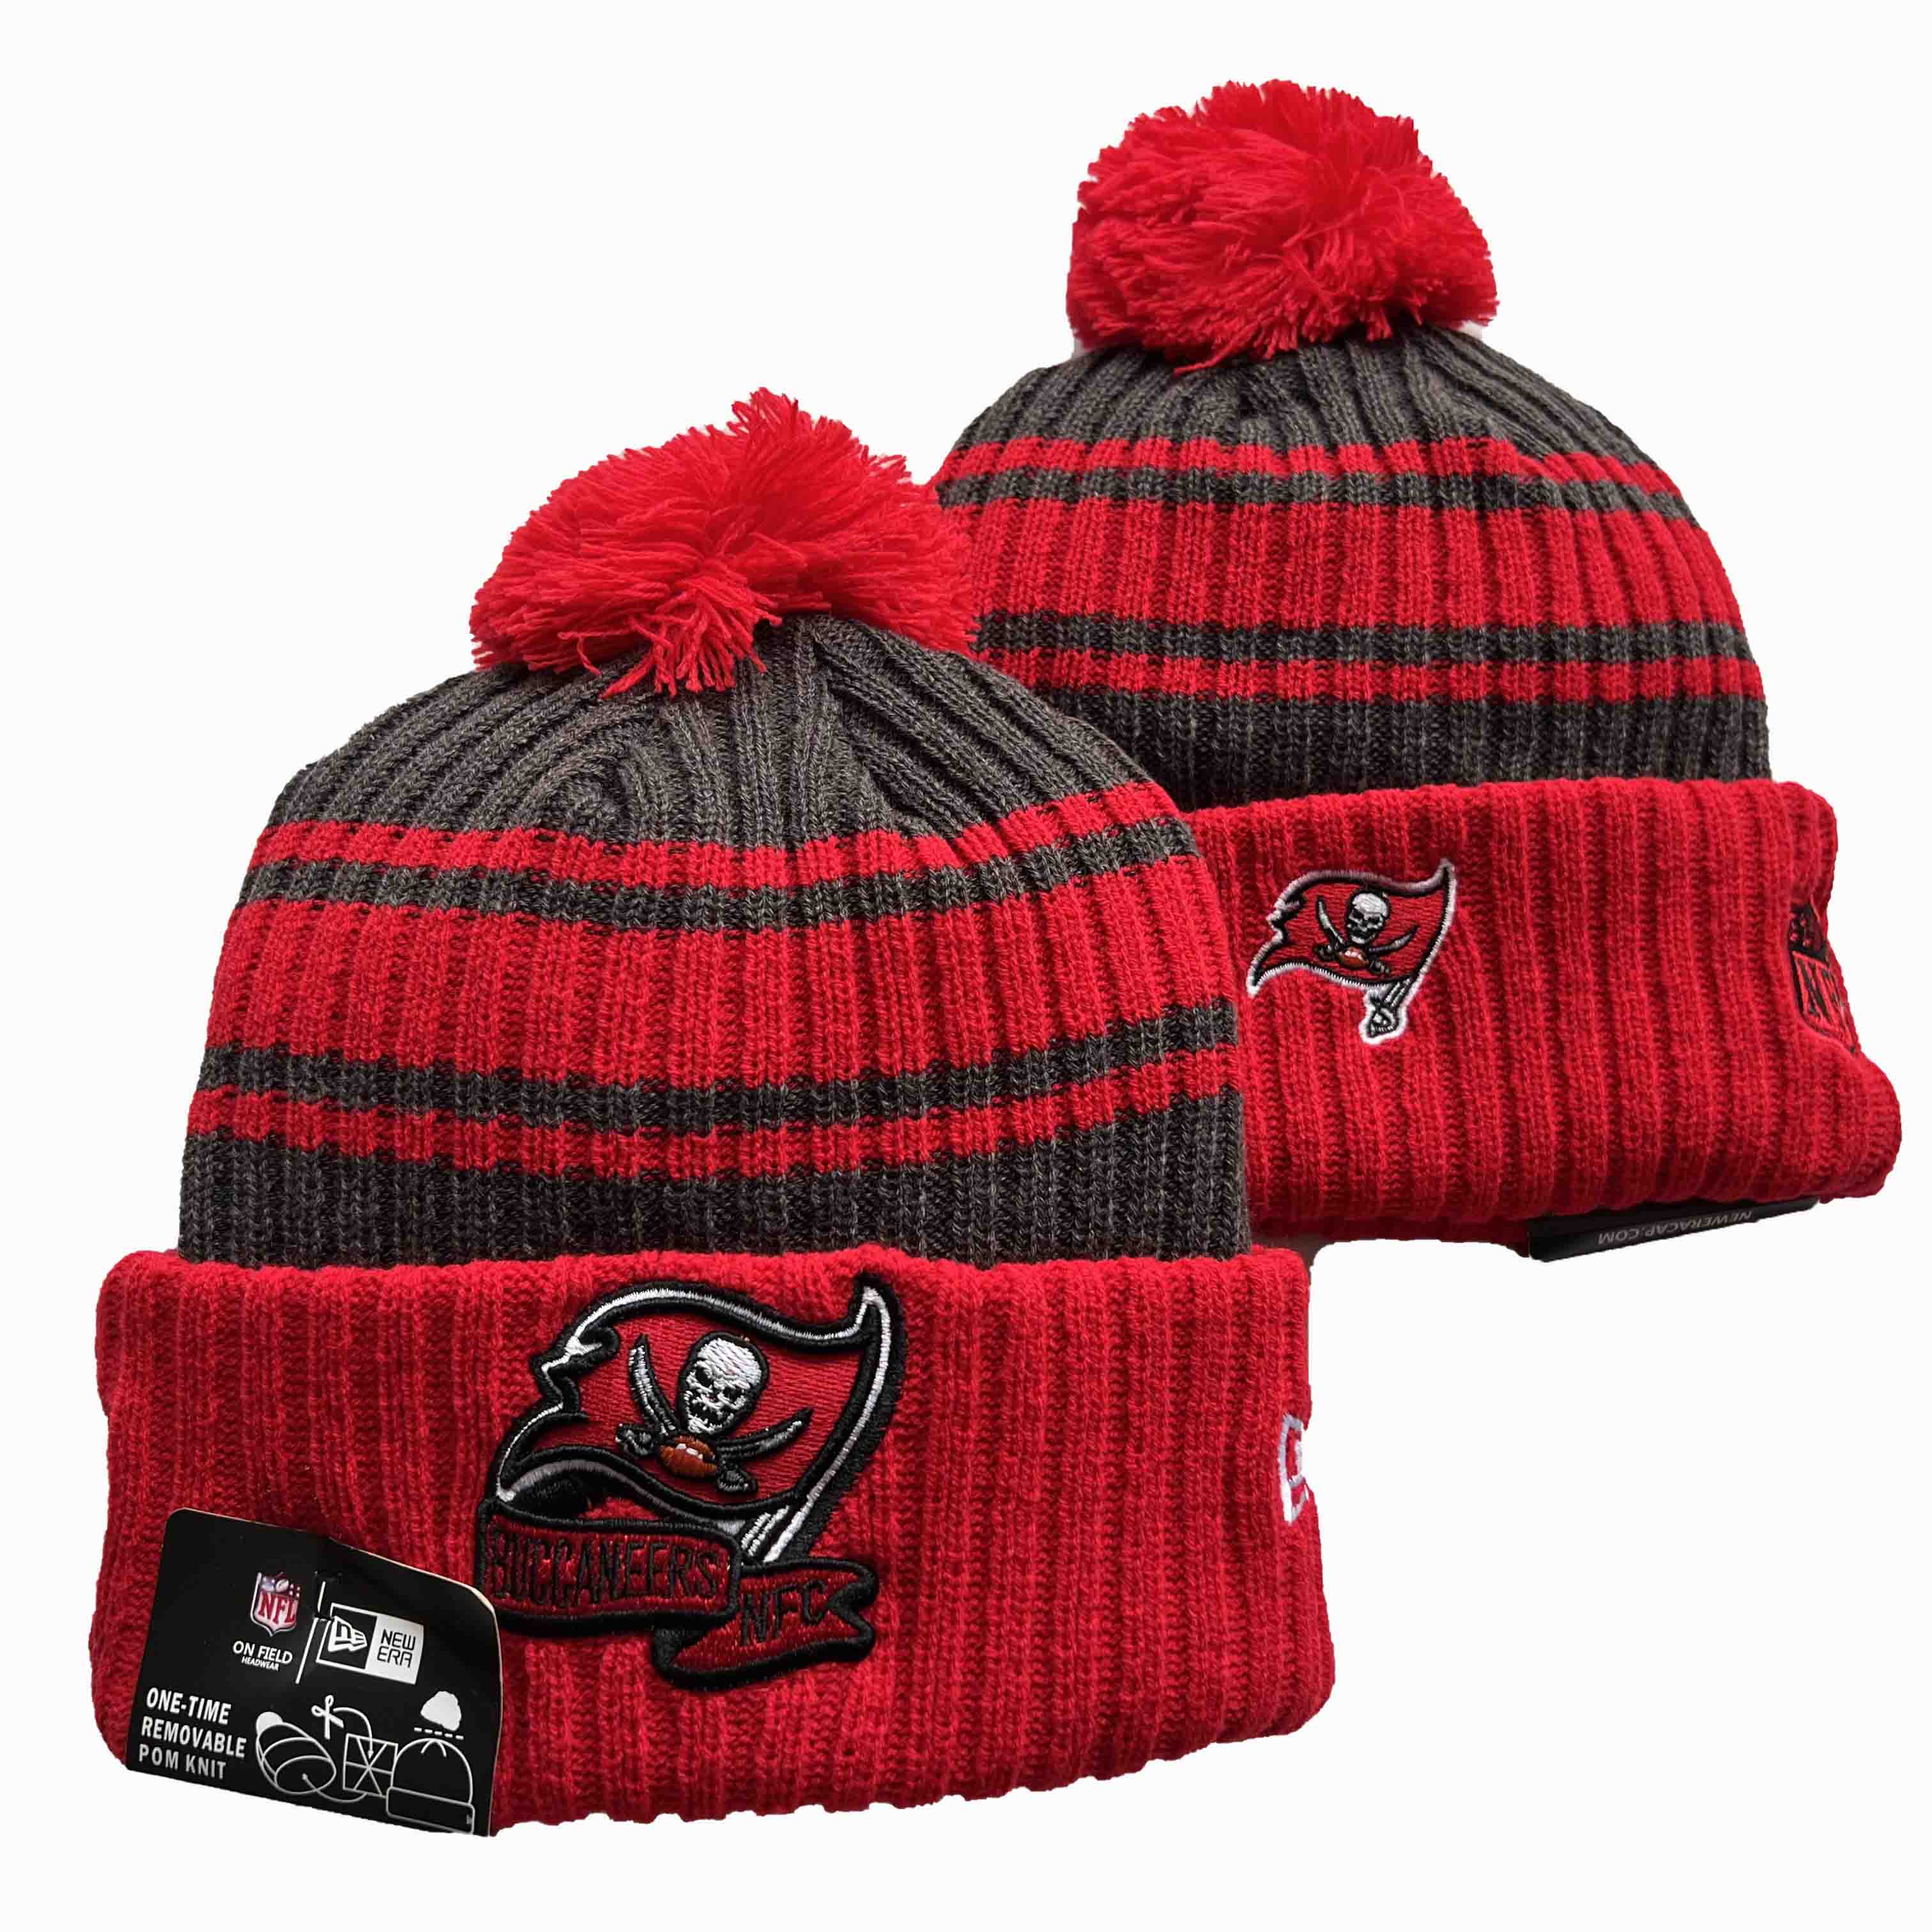 NFL Tampa Bay Buccaneers Beanies Knit Hats-YD1275